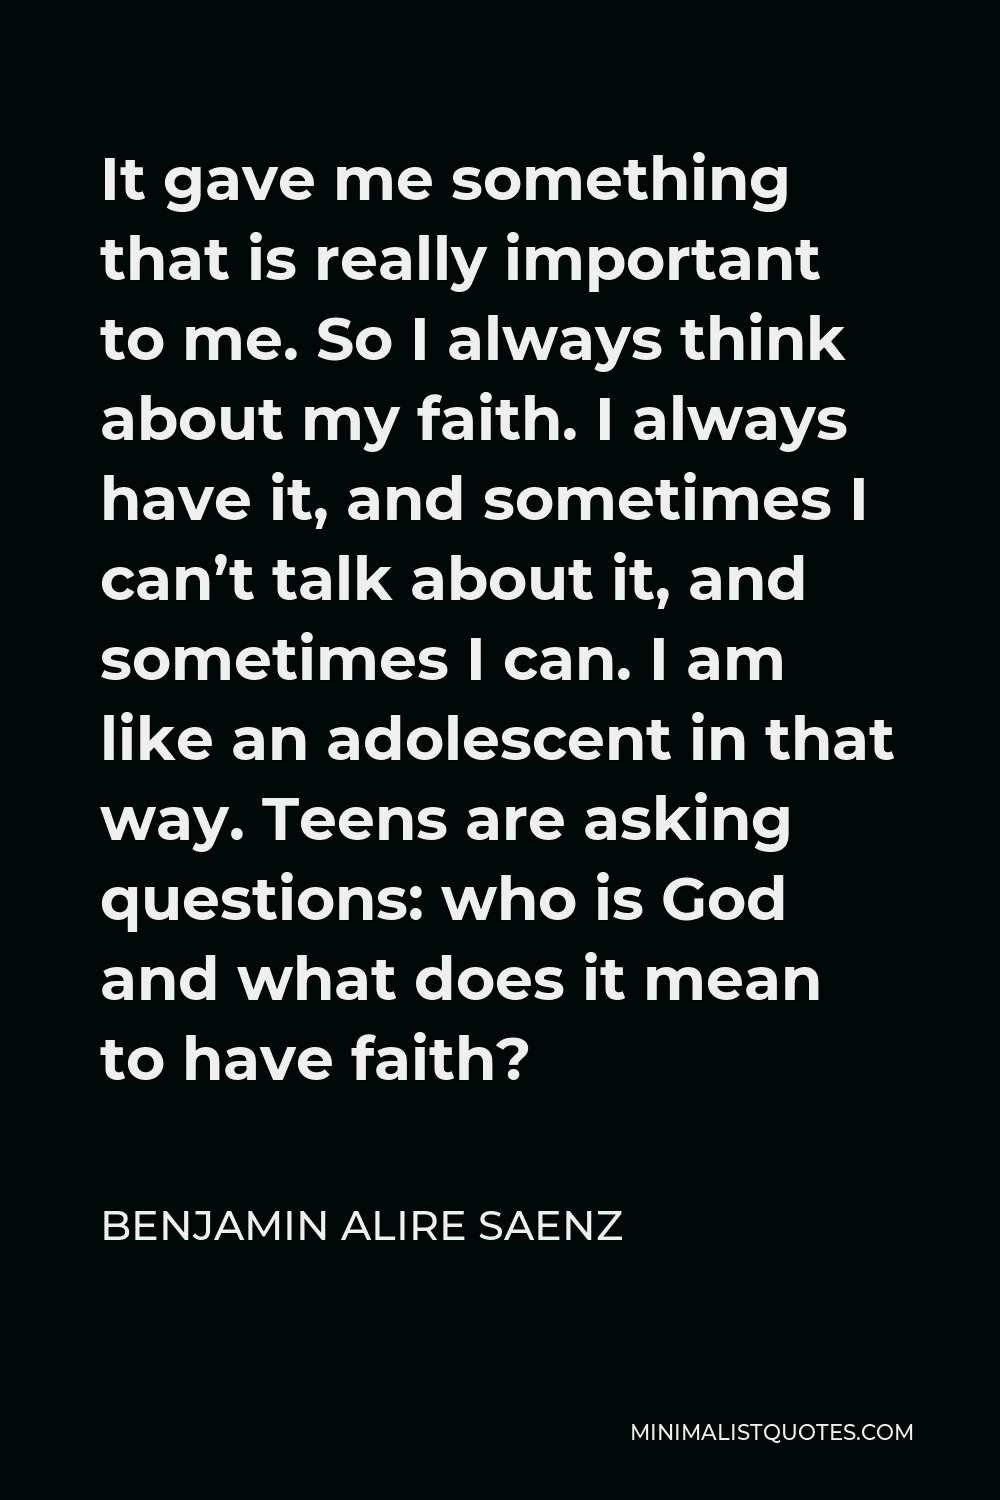 Benjamin Alire Saenz Quote - It gave me something that is really important to me. So I always think about my faith. I always have it, and sometimes I can’t talk about it, and sometimes I can. I am like an adolescent in that way. Teens are asking questions: who is God and what does it mean to have faith?